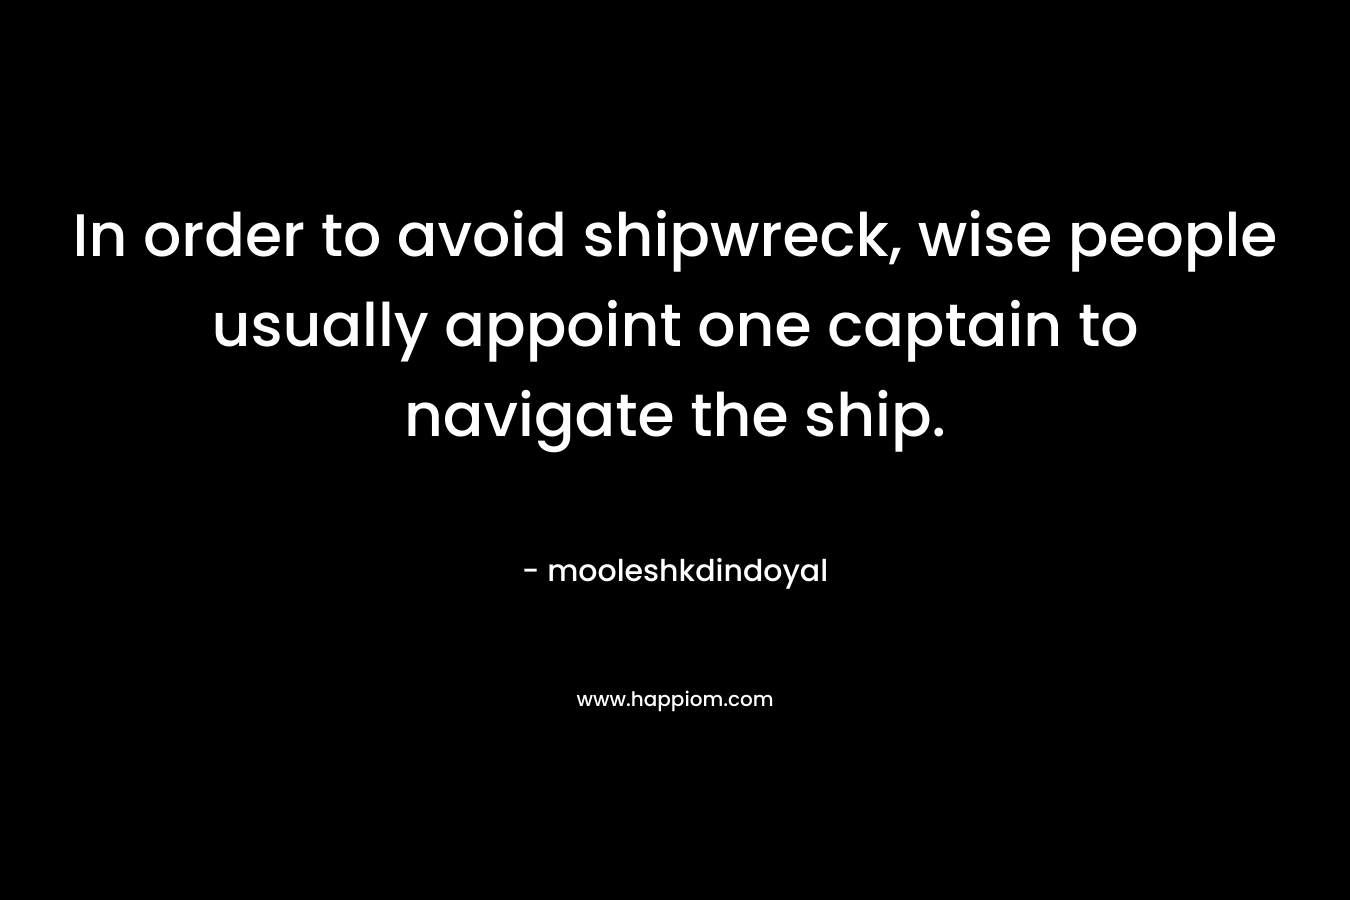 In order to avoid shipwreck, wise people usually appoint one captain to navigate the ship. – mooleshkdindoyal